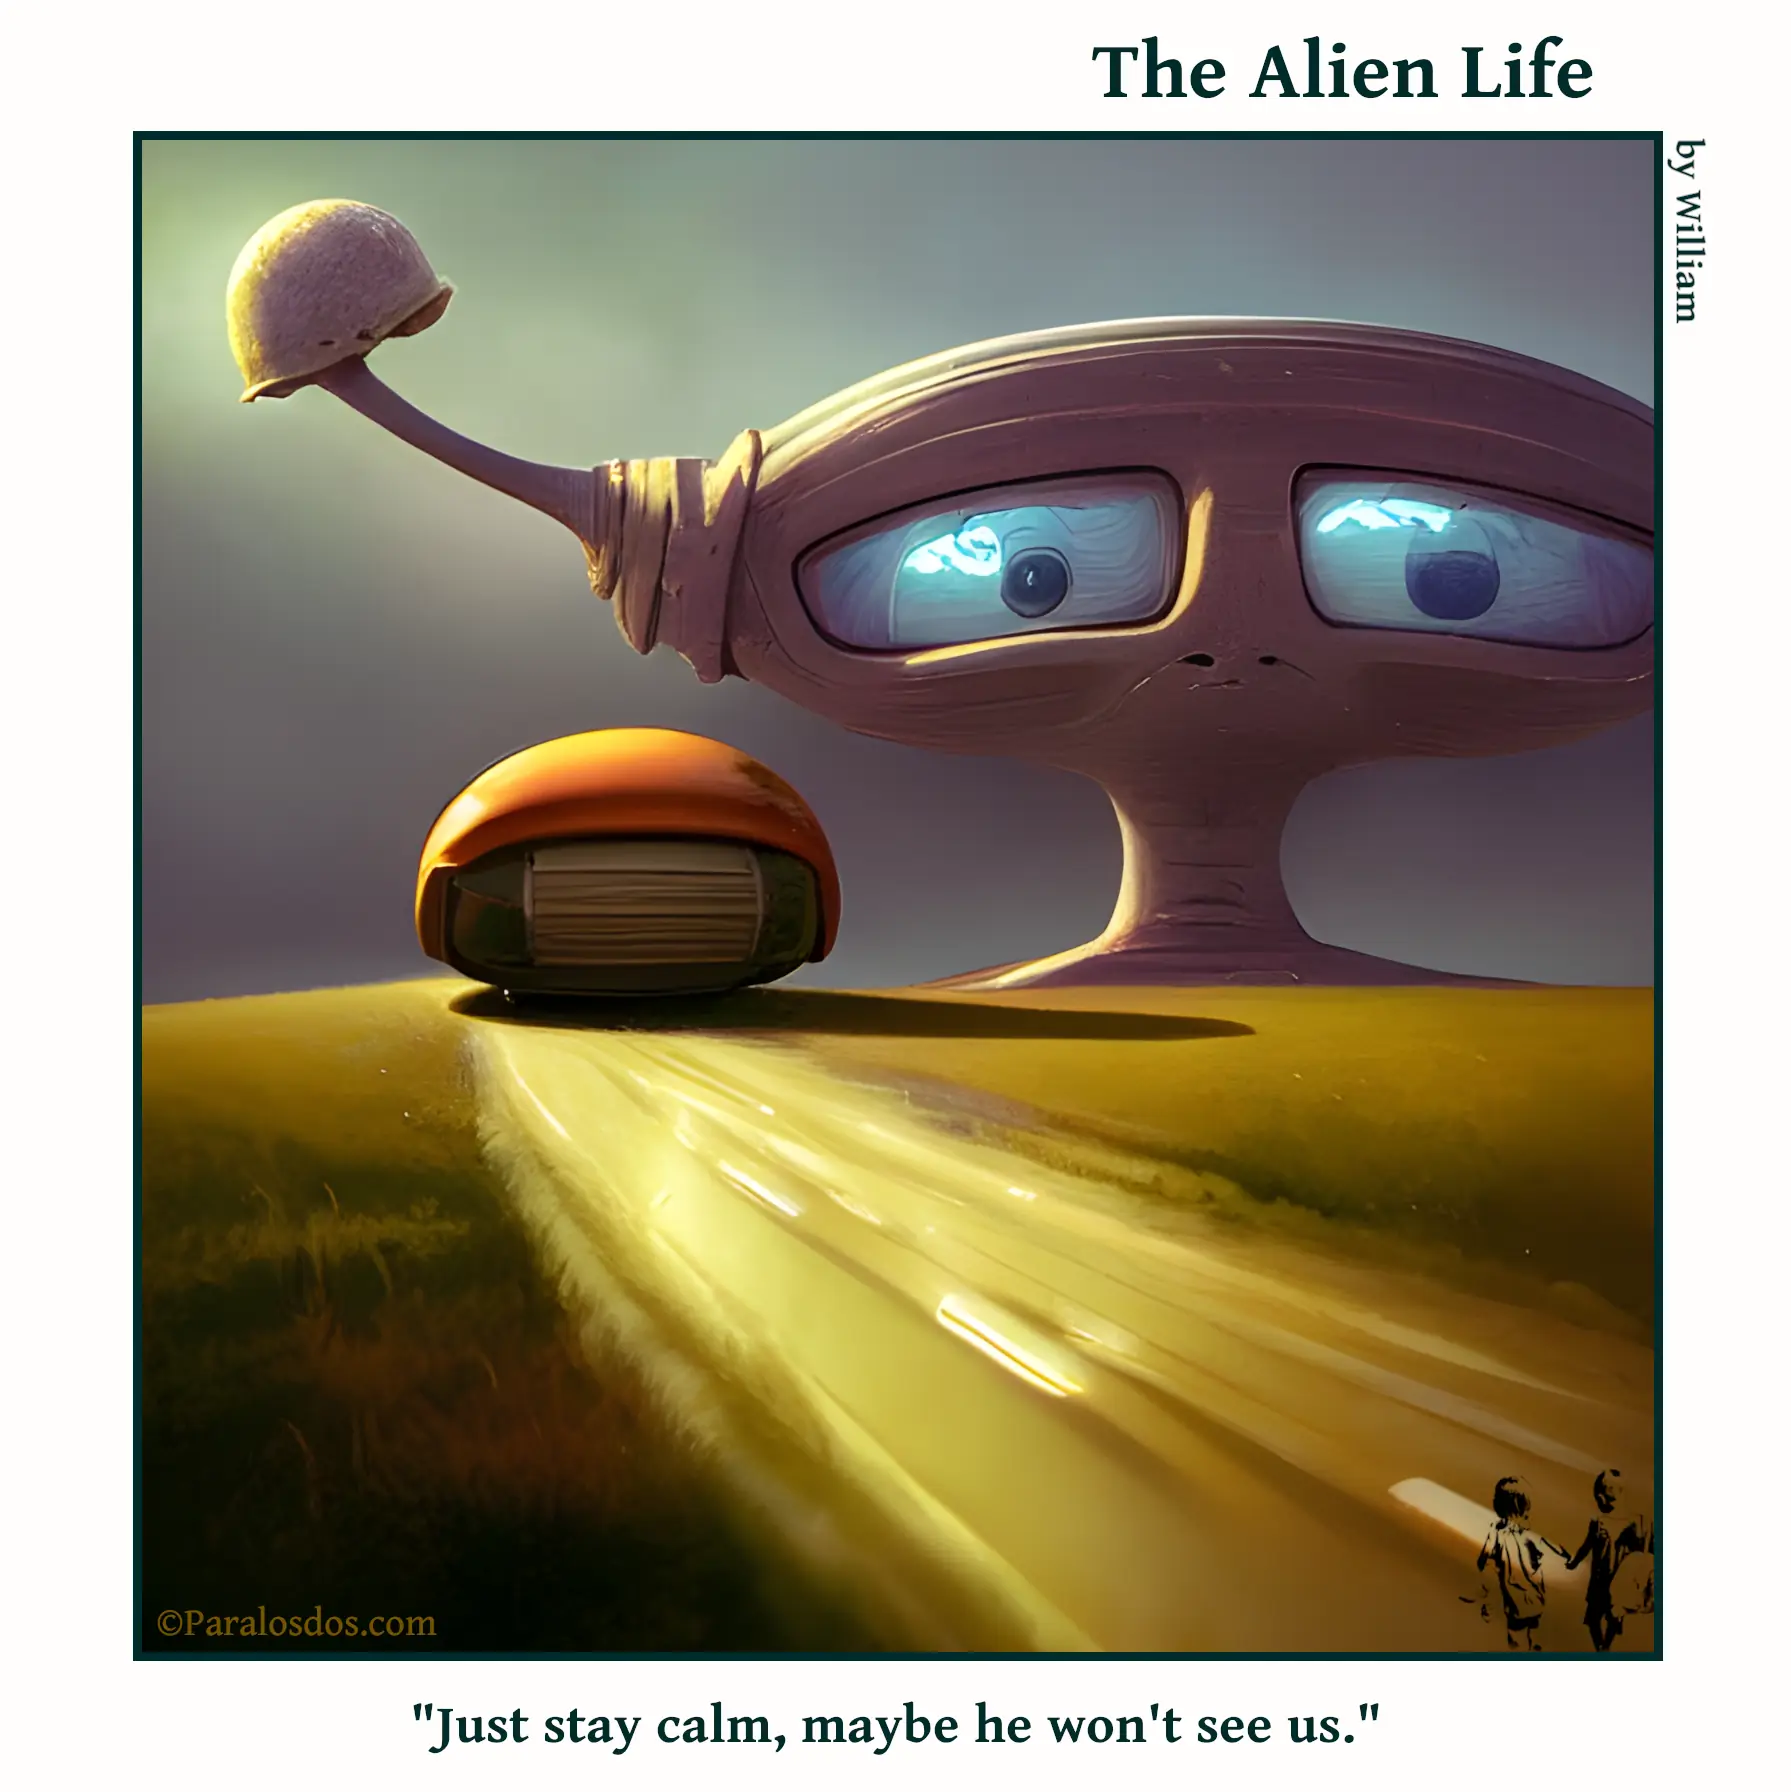 The Alien Life, one panel Comic. A car is travelling on a road towards a giant alien head with big eyes staring in the car's direction. The caption reads: "Just stay calm, maybe he won't see us."